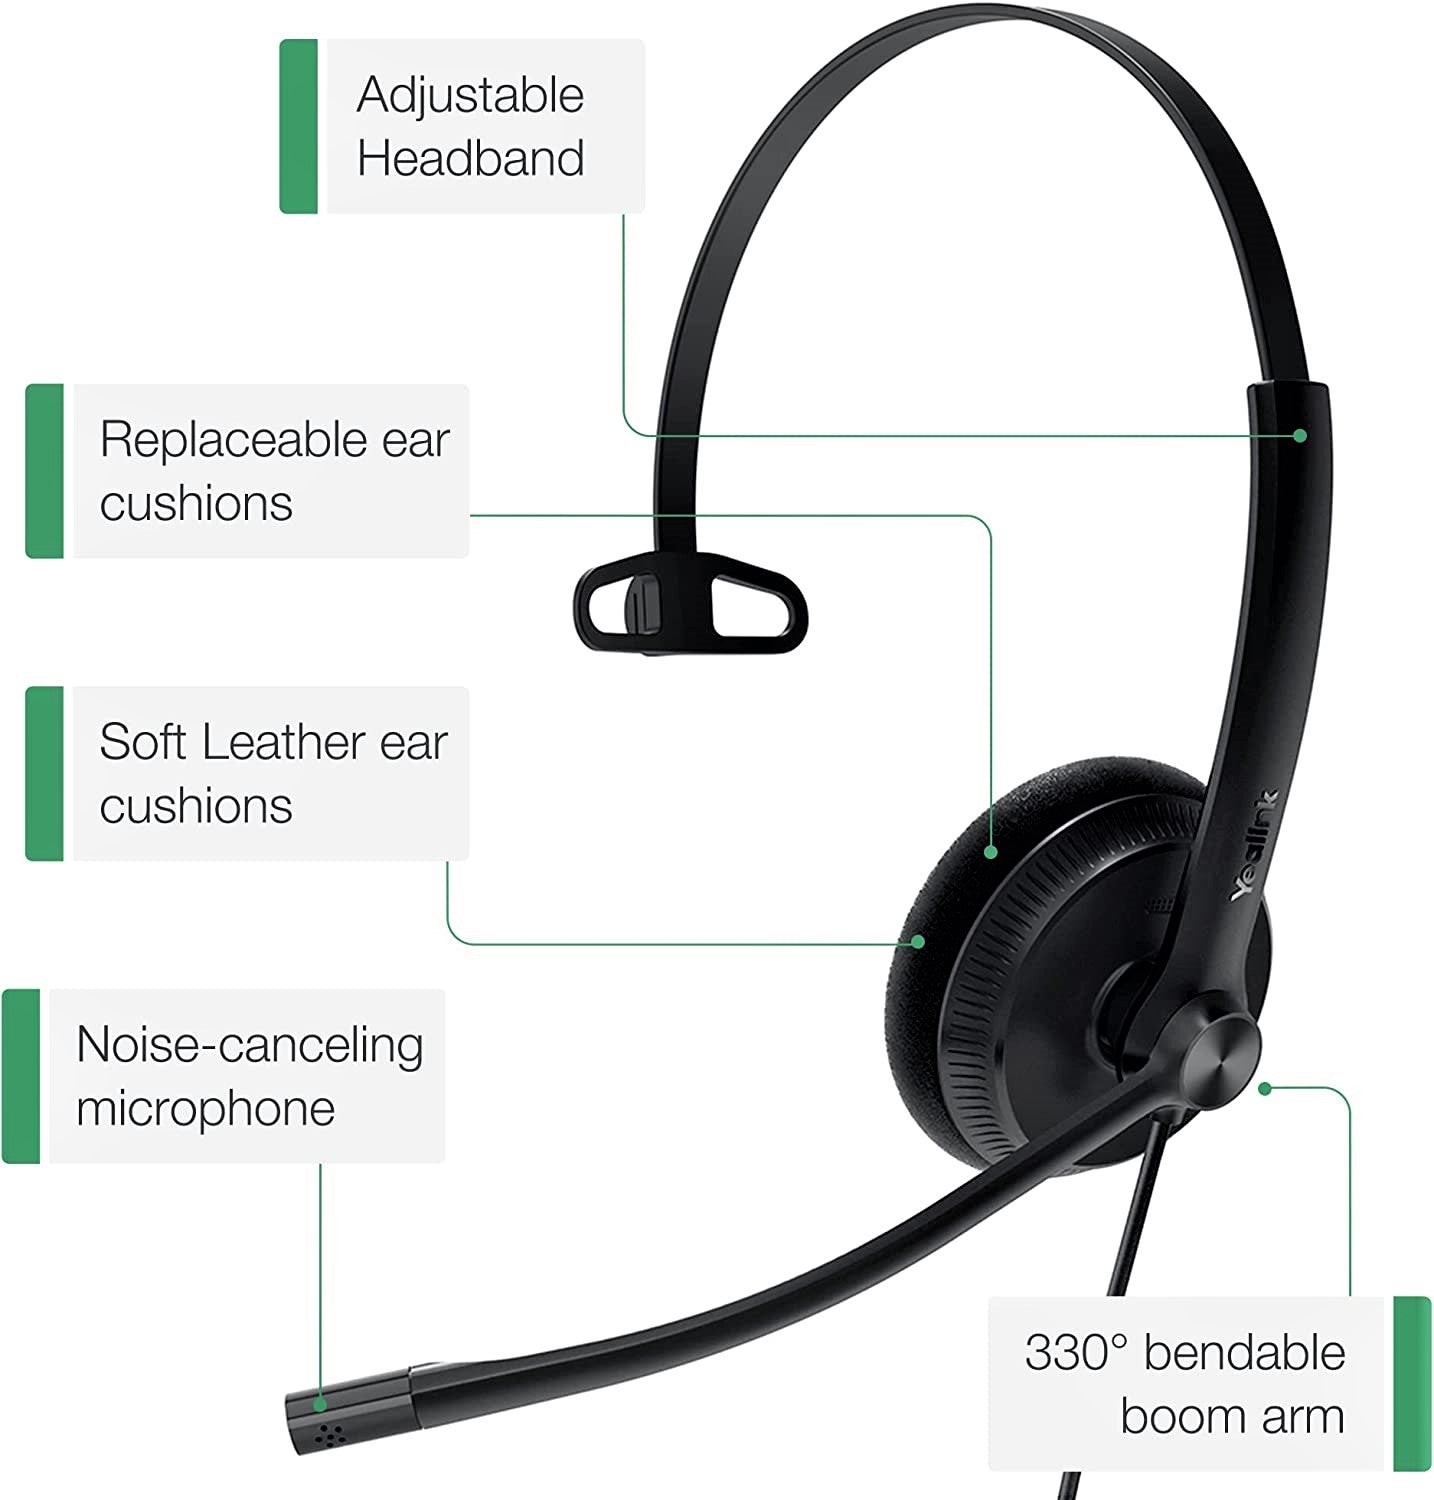 Yealink Headset with Microphone RJ9 for Voip Phone Wired Headset Teams Certified YHS34 YHS33 Noise Cancelling with Mic